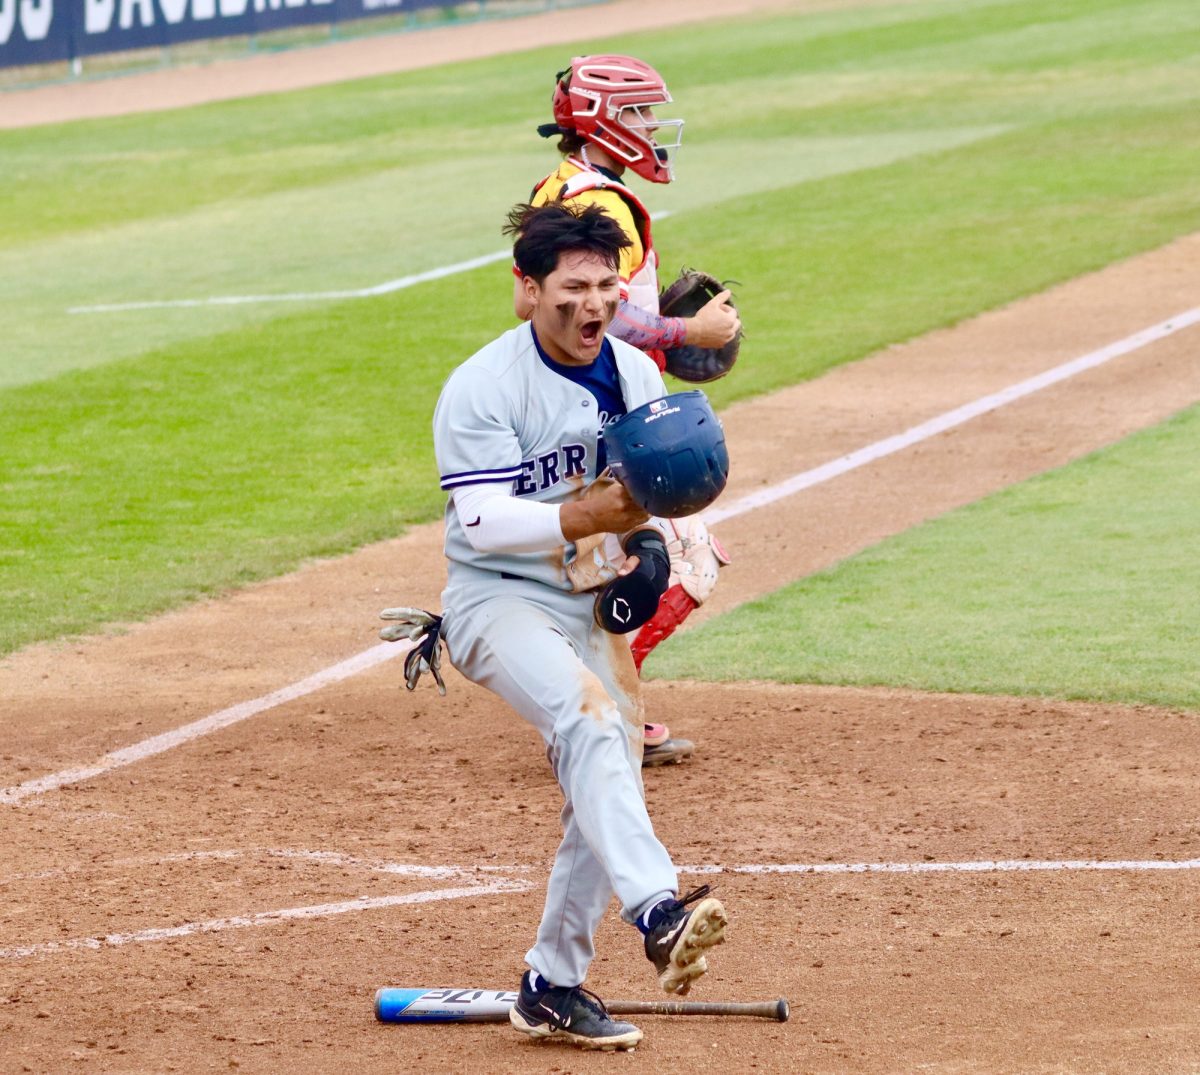 Outfielder, Nico Briones yelling and pumped after scoring at home from second base. 